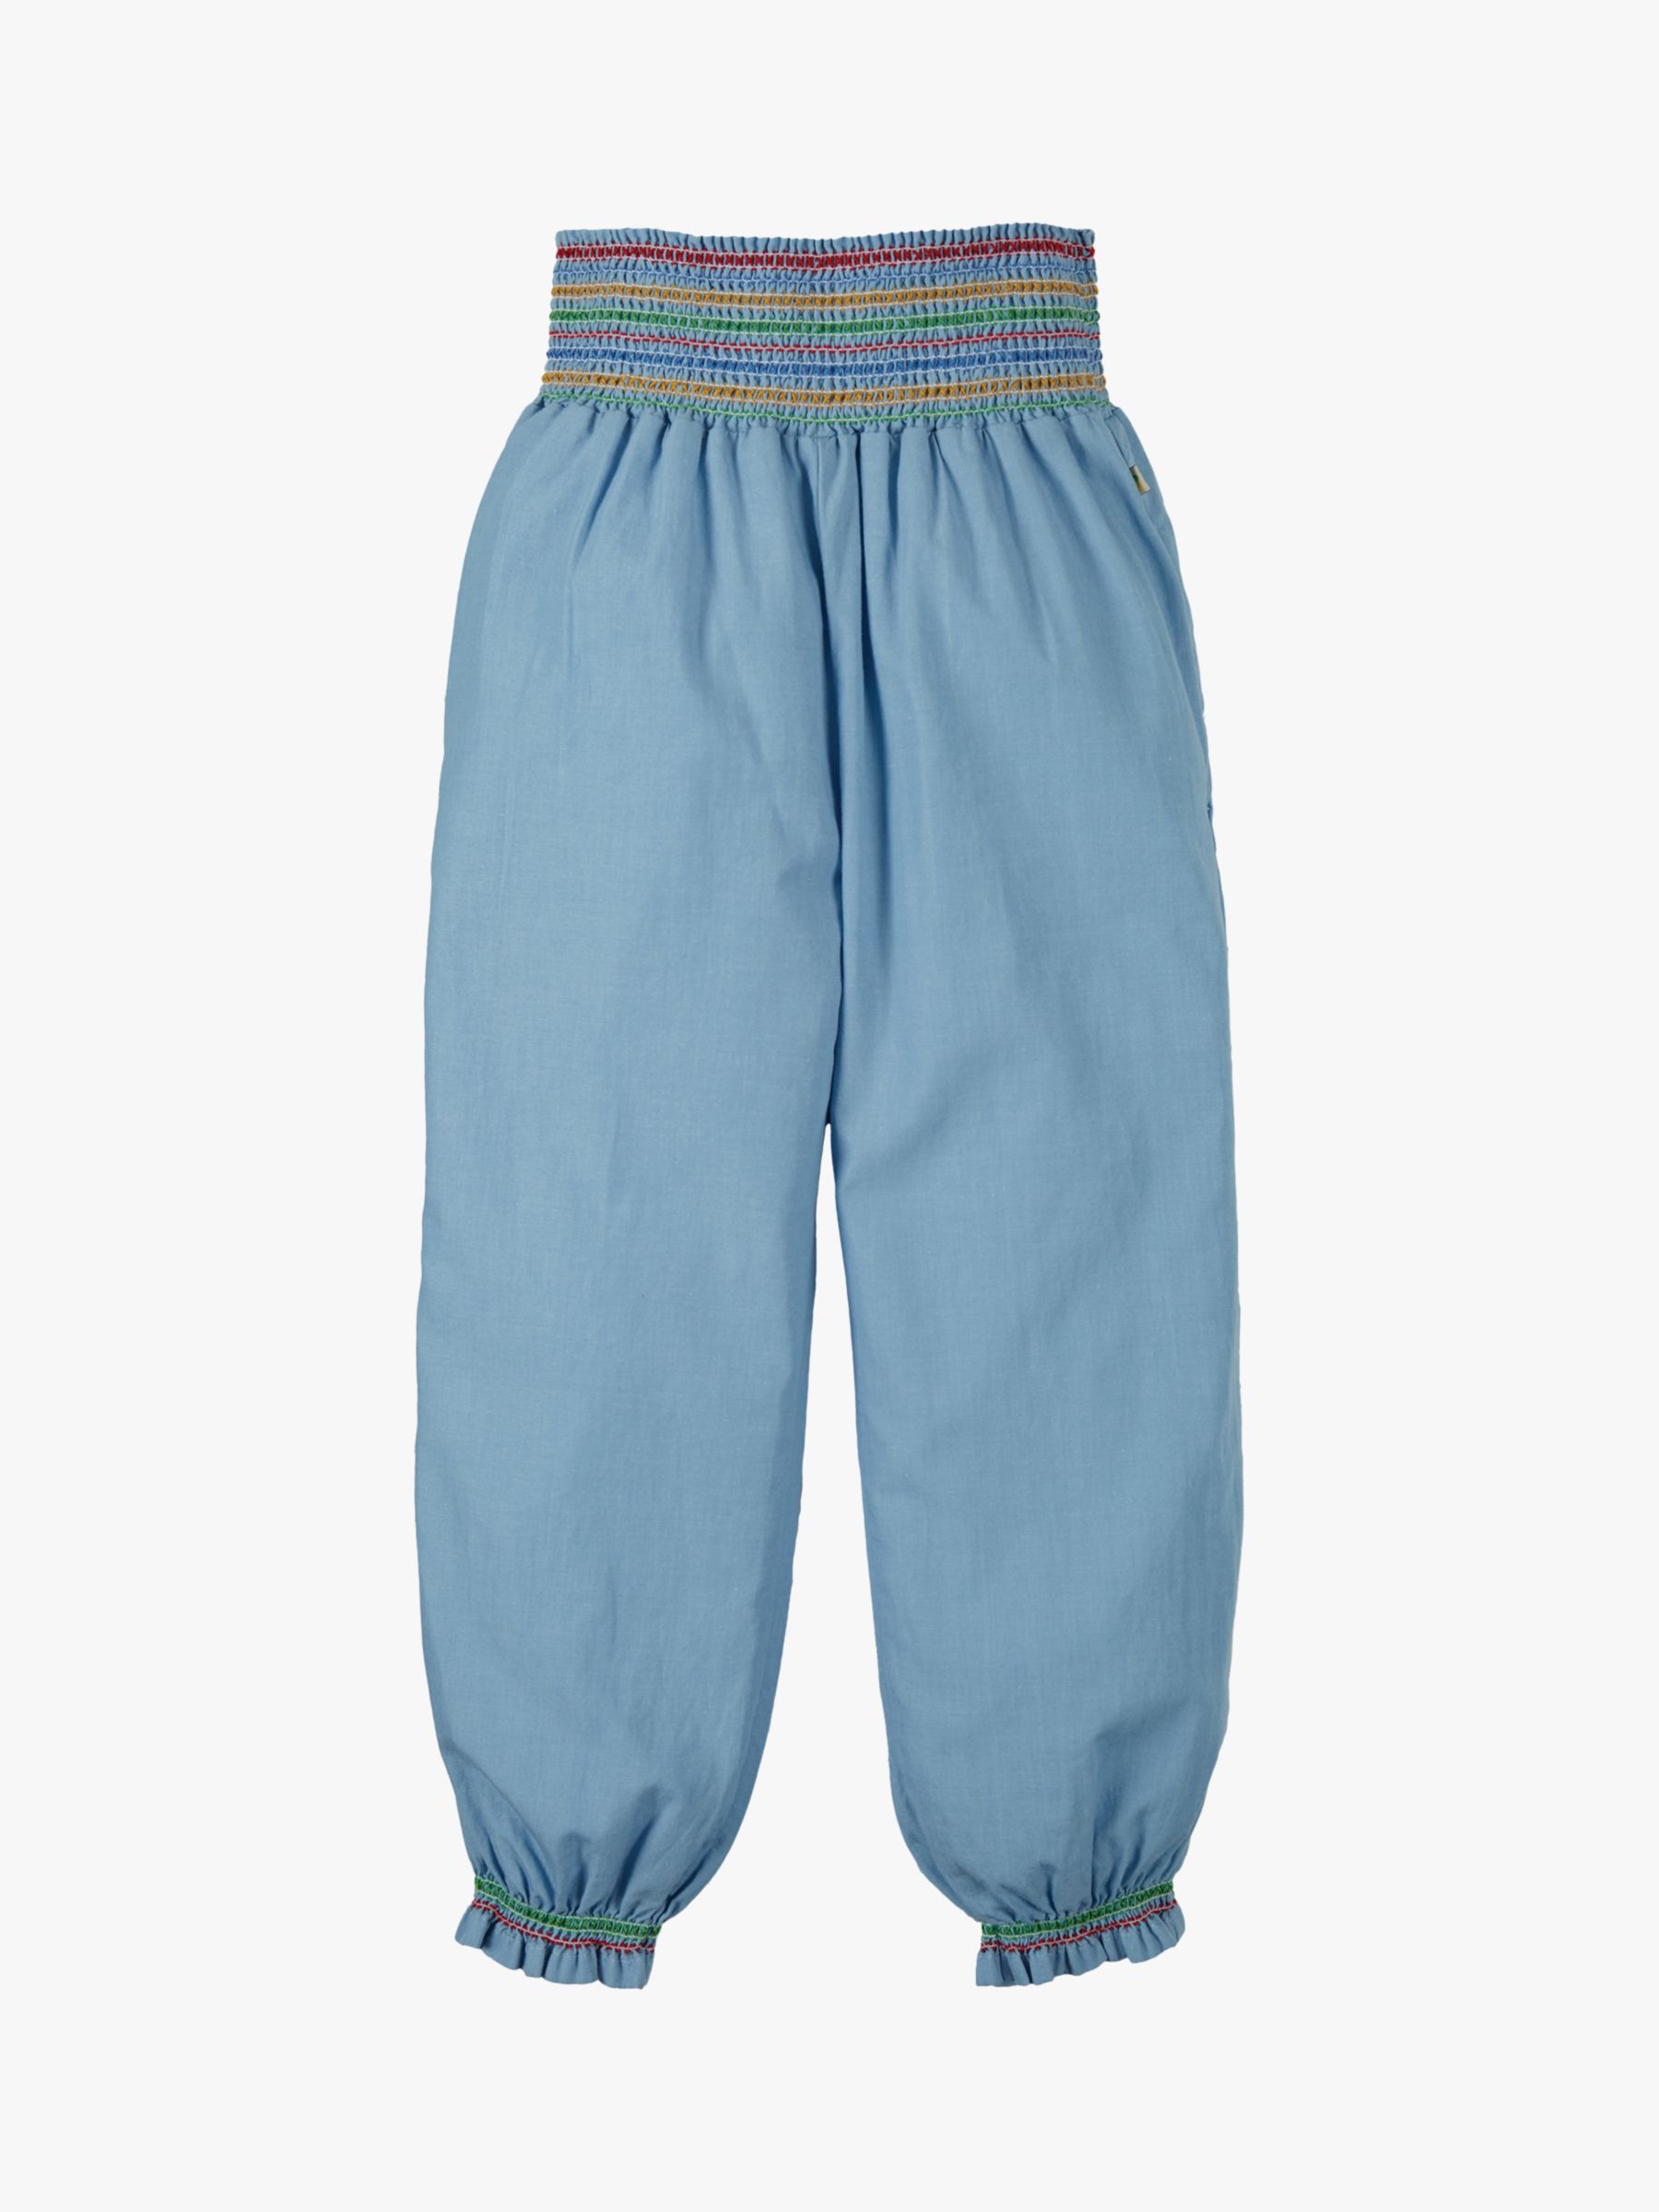 Frugi Kids' Hermione Organic Cotton Harem Trousers, Chambray, 7-8 years